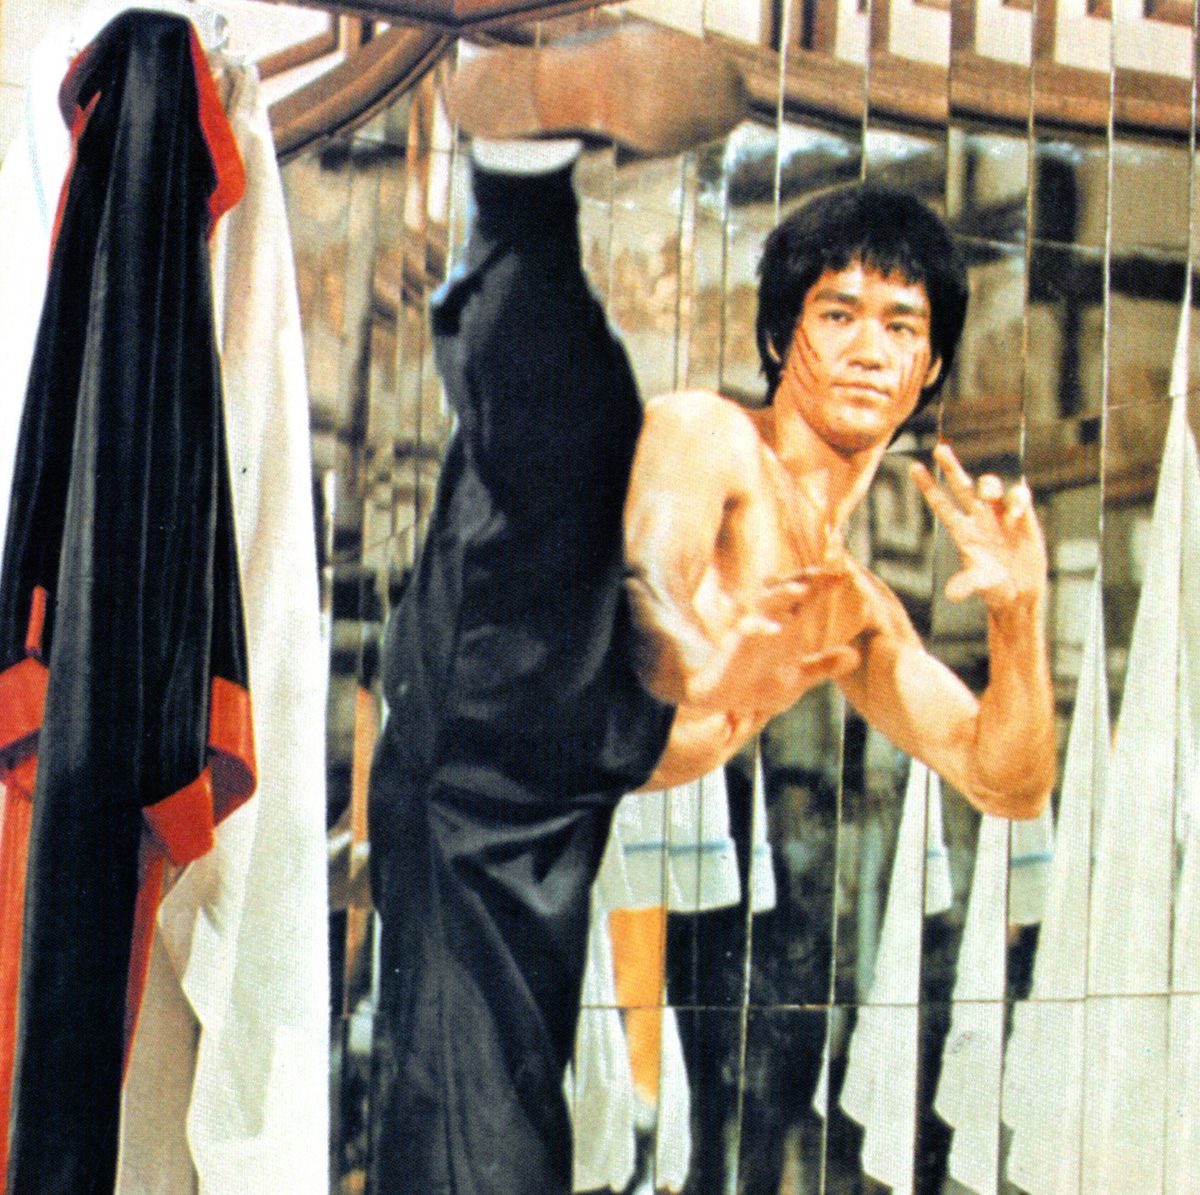 Enter the Dragon 50th Anniversary: Bruce Lee's Daughter, Shannon